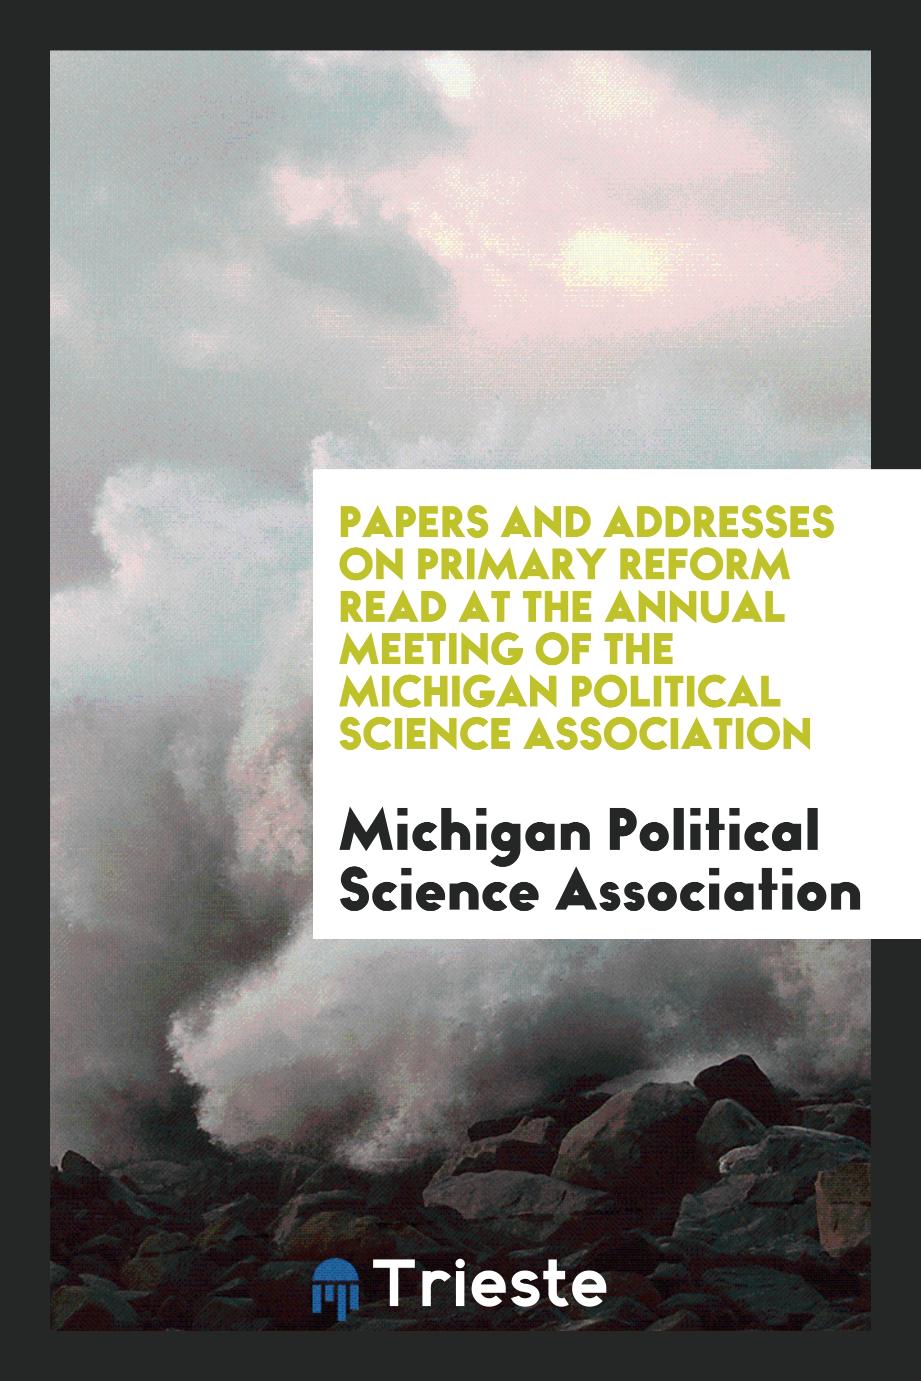 Papers and Addresses on Primary Reform Read at the Annual Meeting of the Michigan Political Science Association